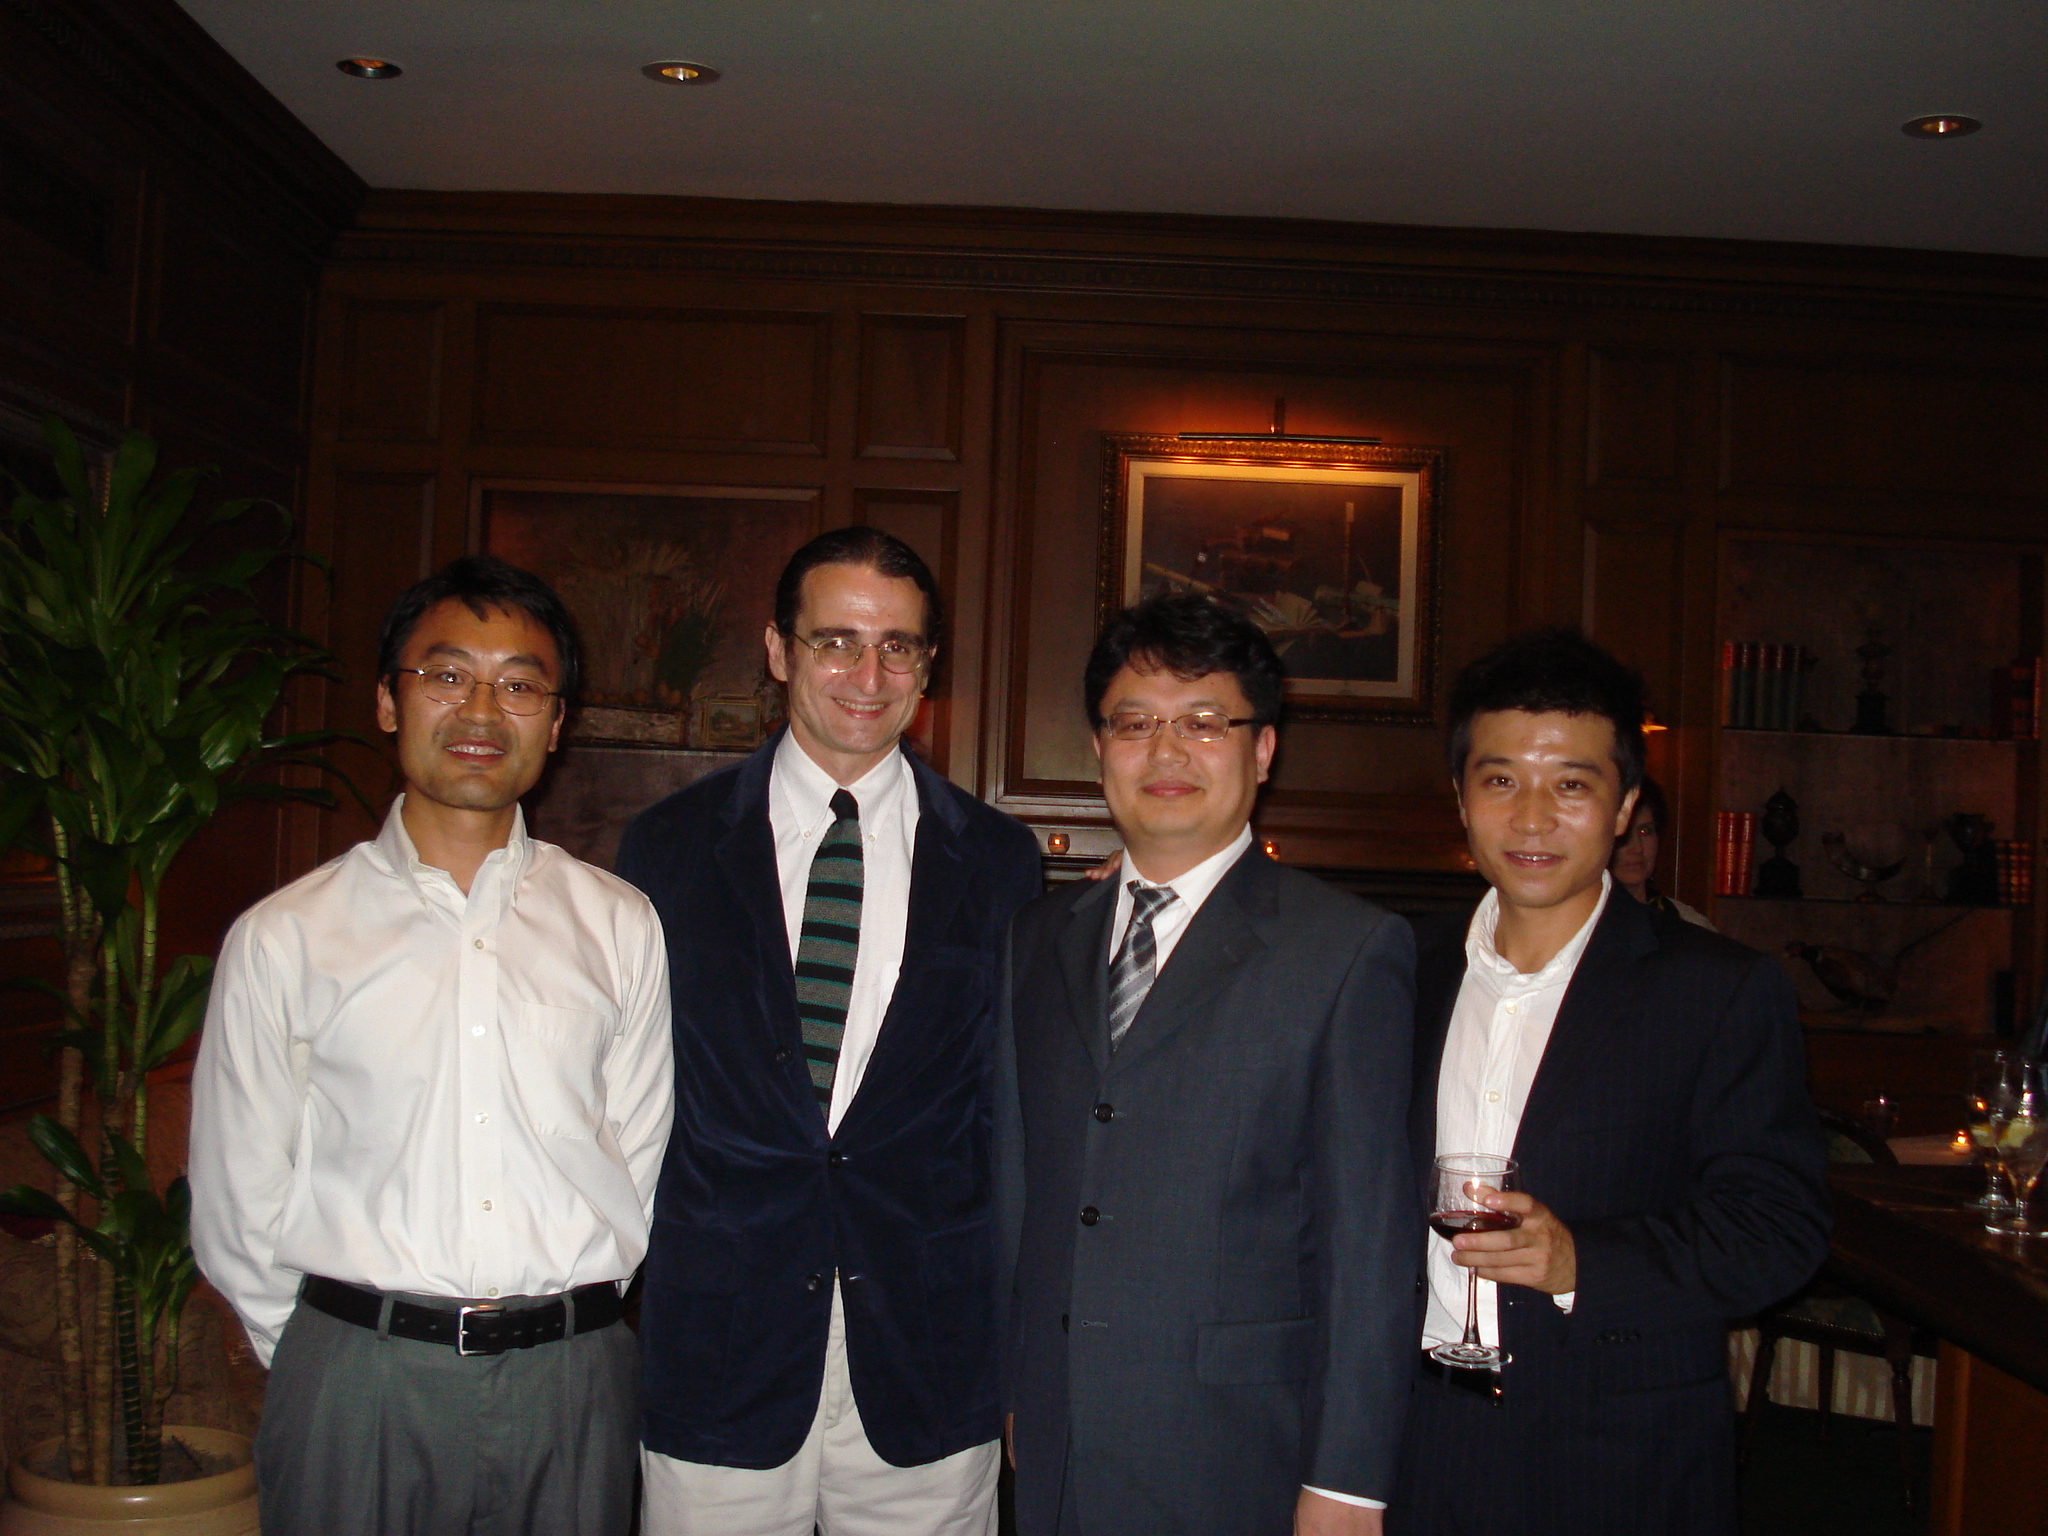 Picture at
Jung's 2008 wedding